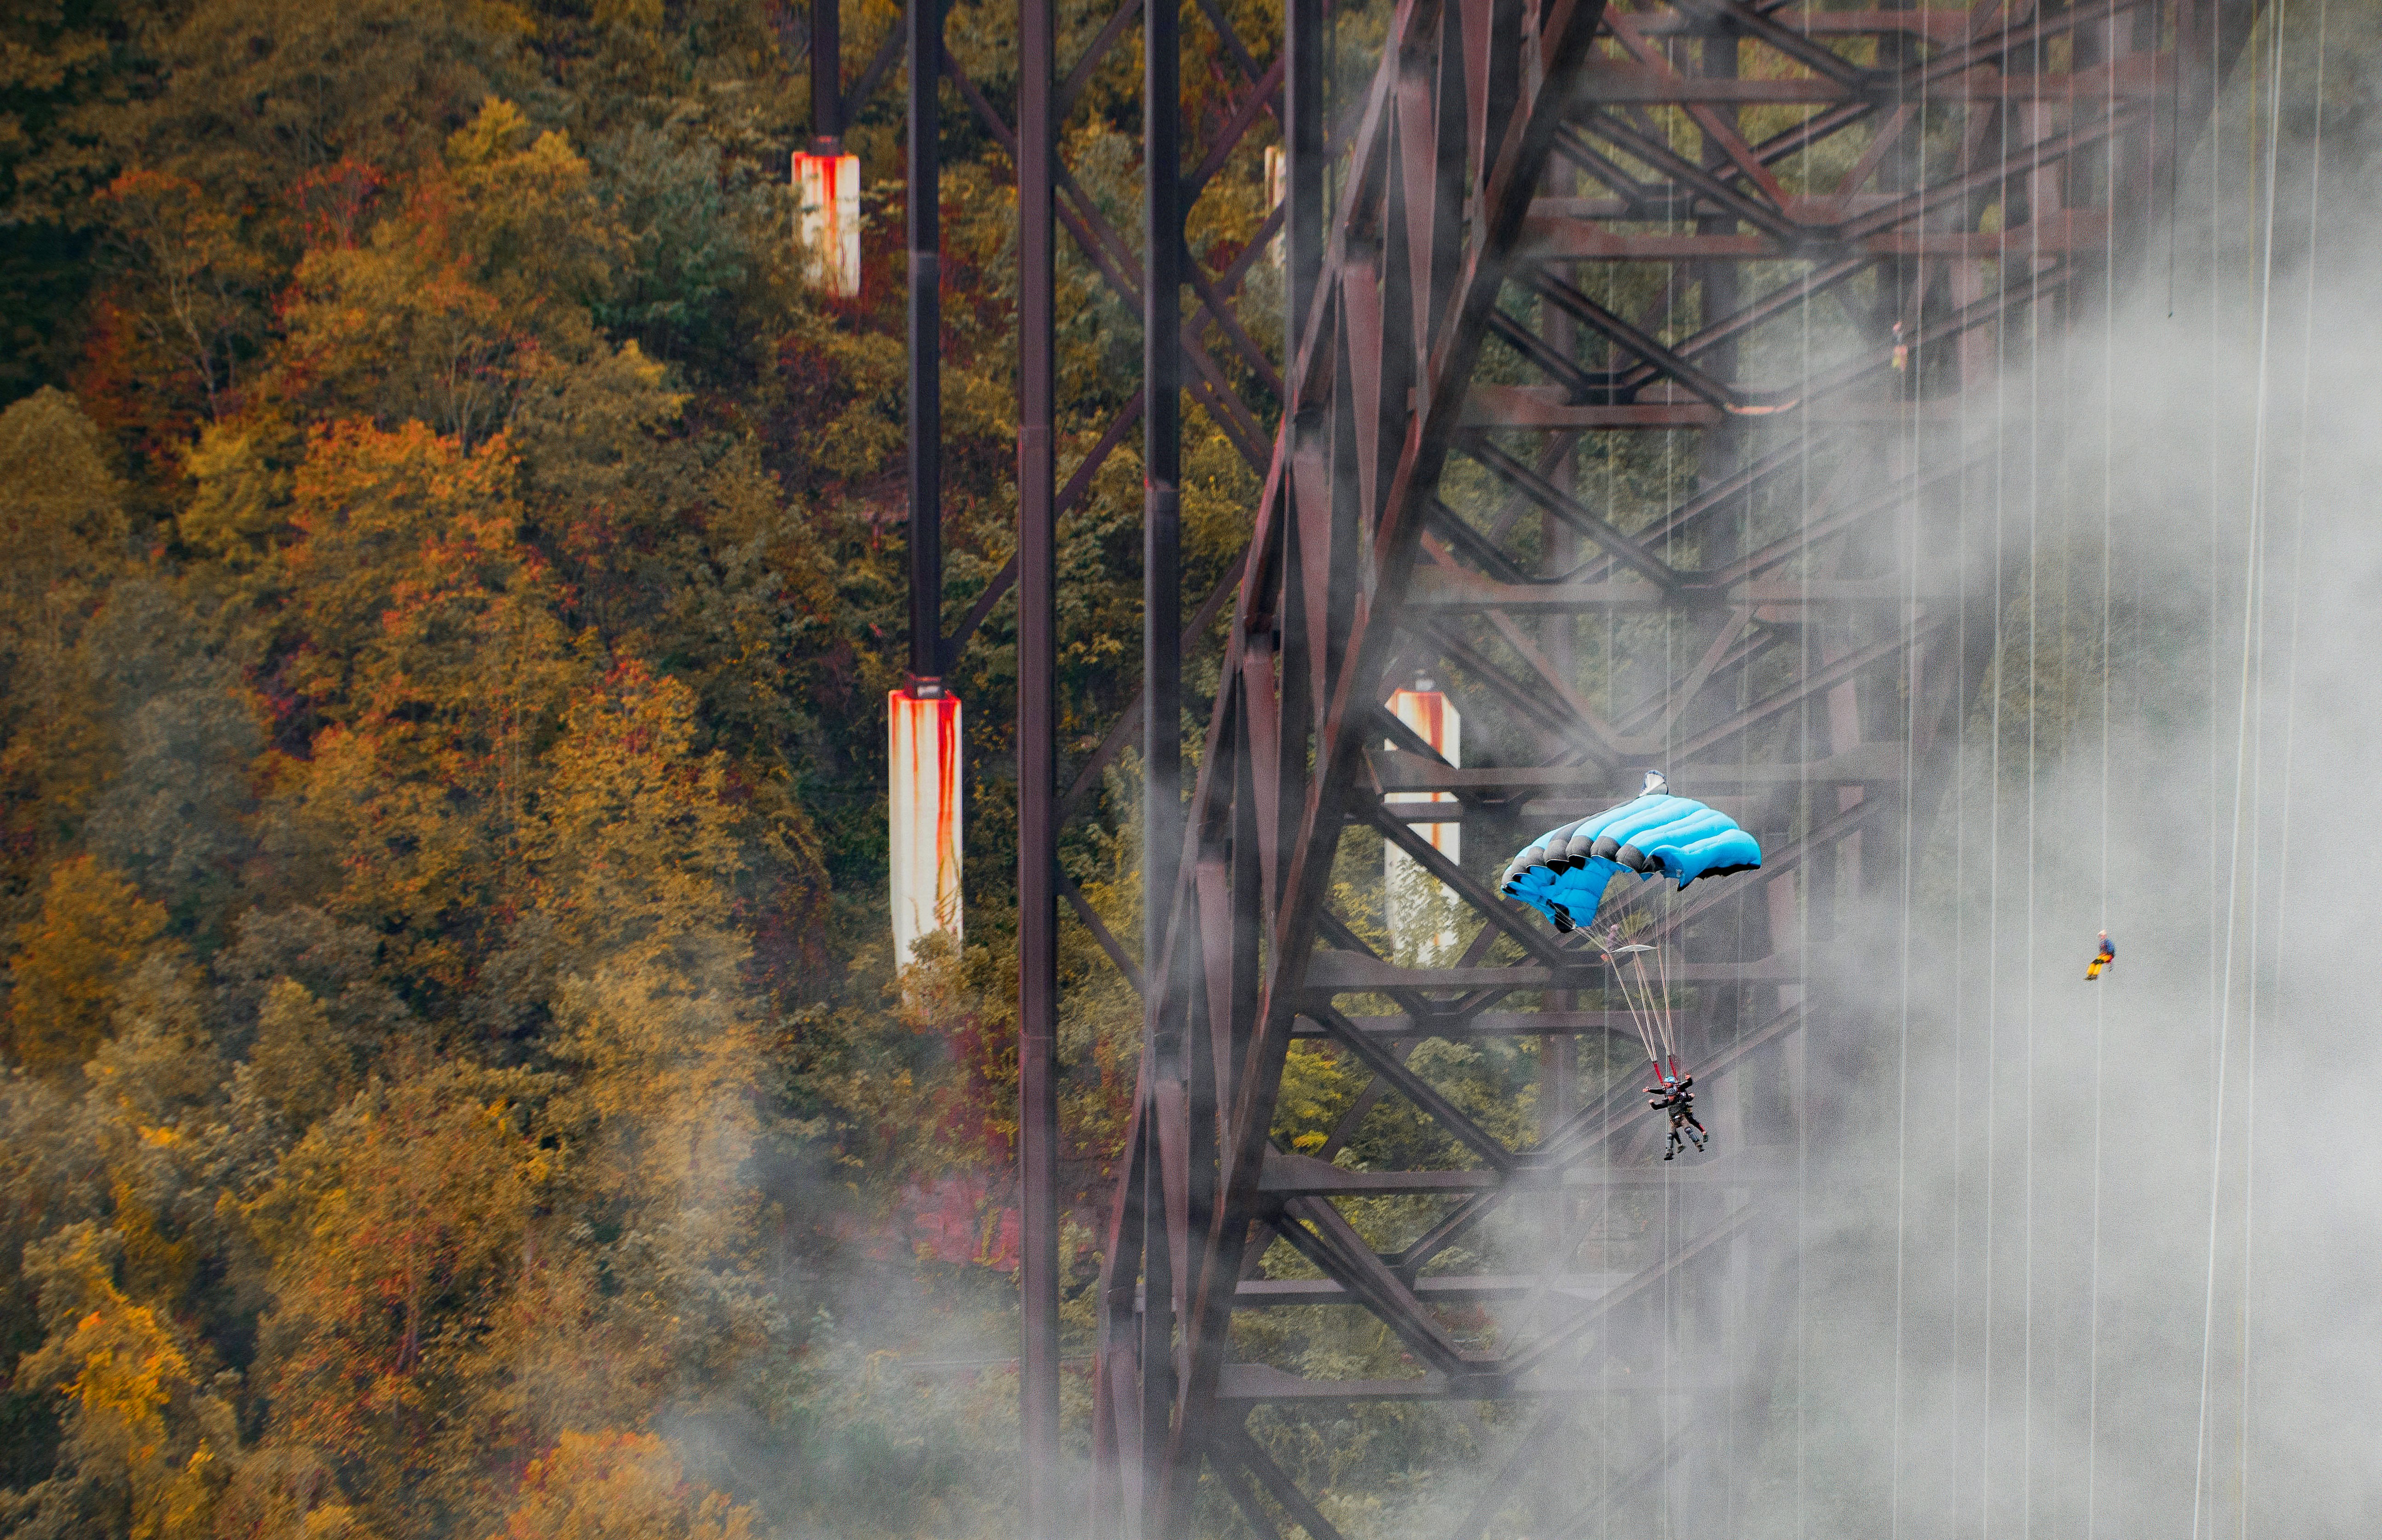 Two people attached to a parachute are gliding under New Gorge Bridge during the day. Woodland and support beams for the bridge are visible.